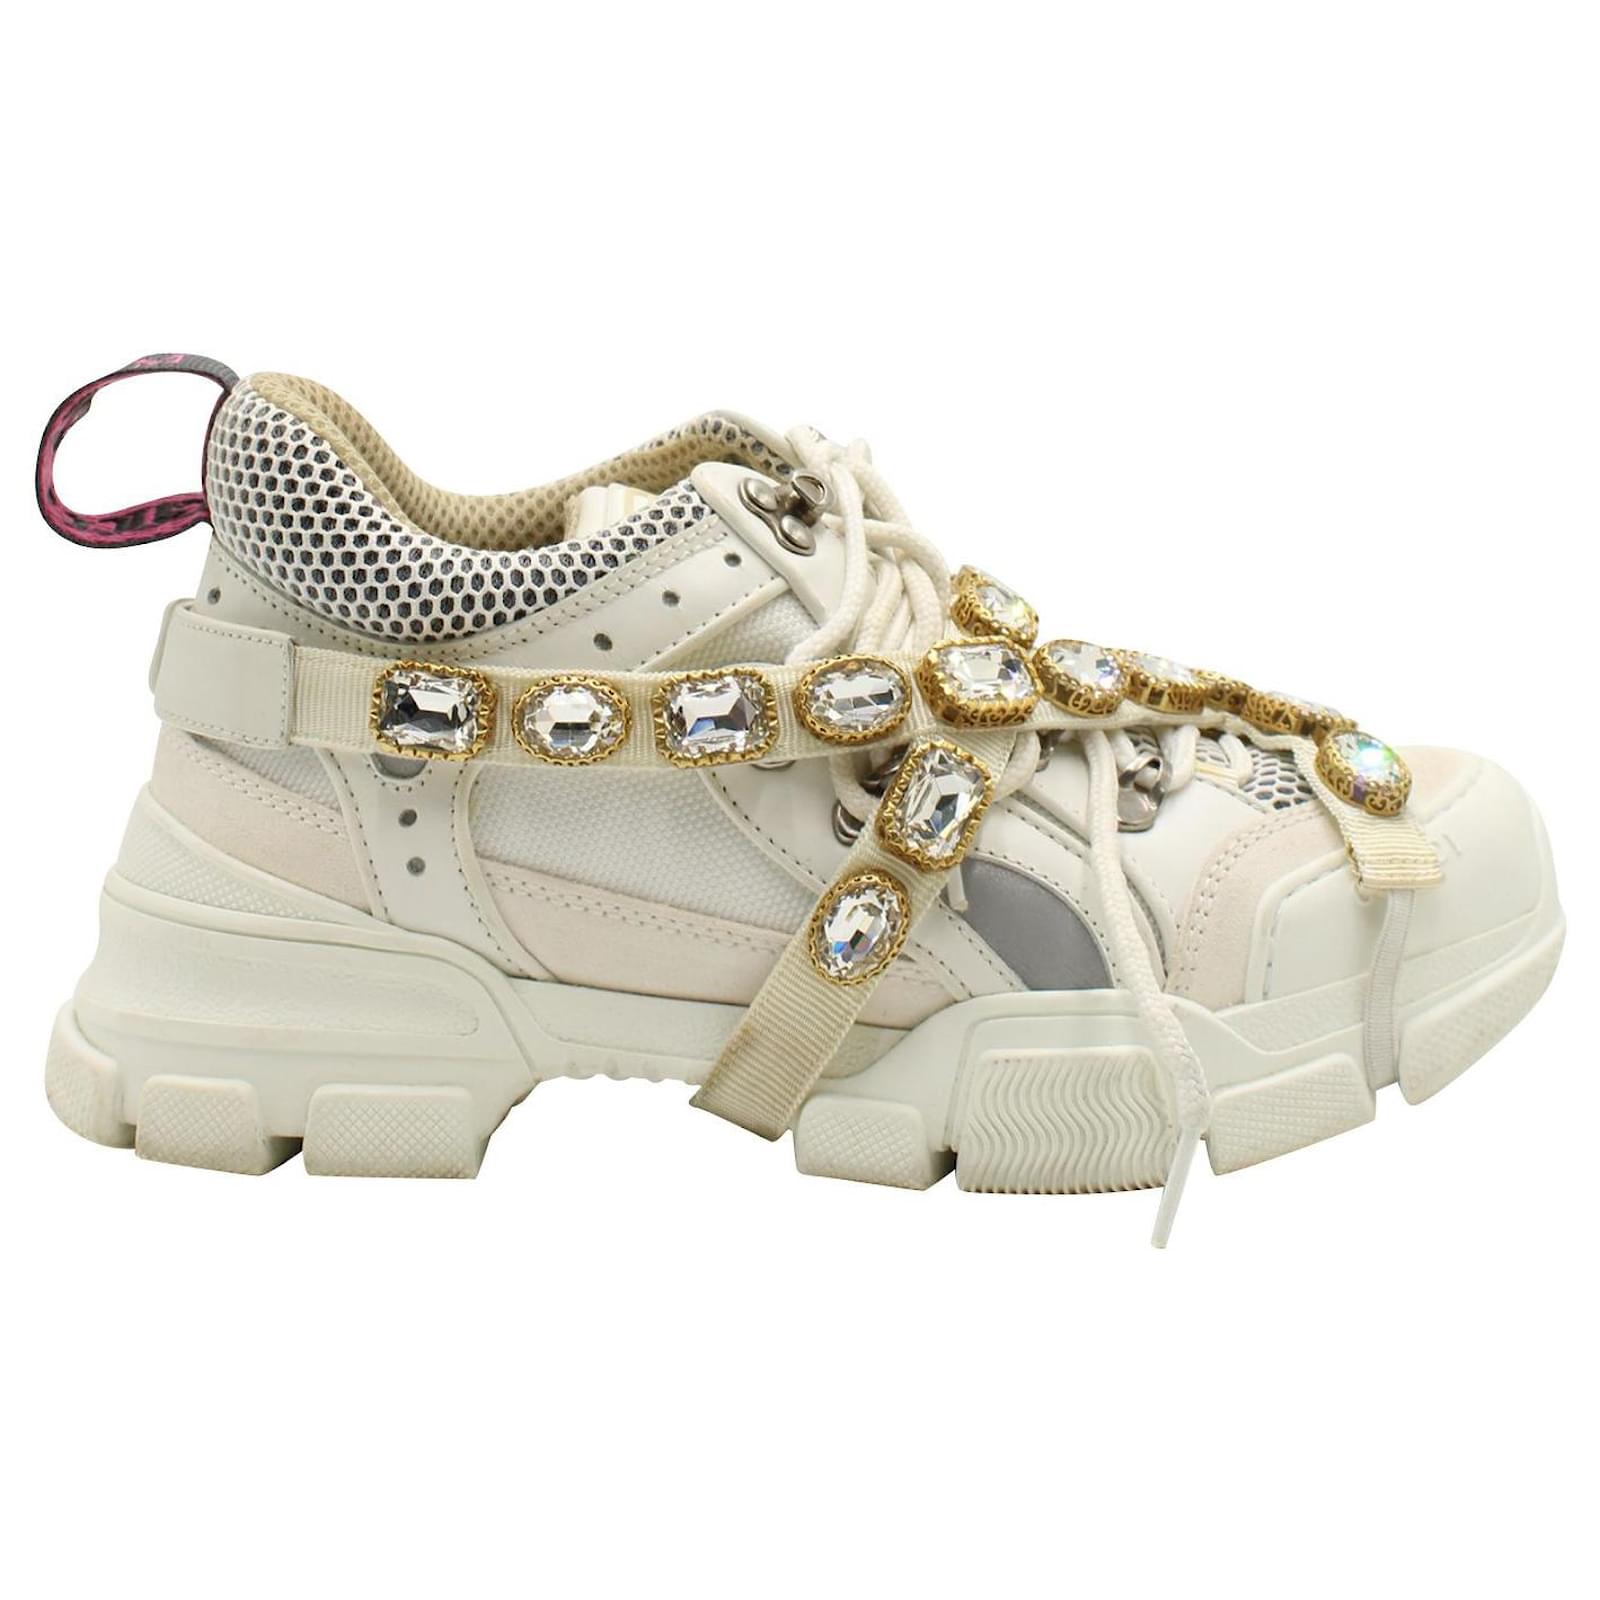 Gucci Flashtrek Sneakers with Removable Crystals  - Joli Closet